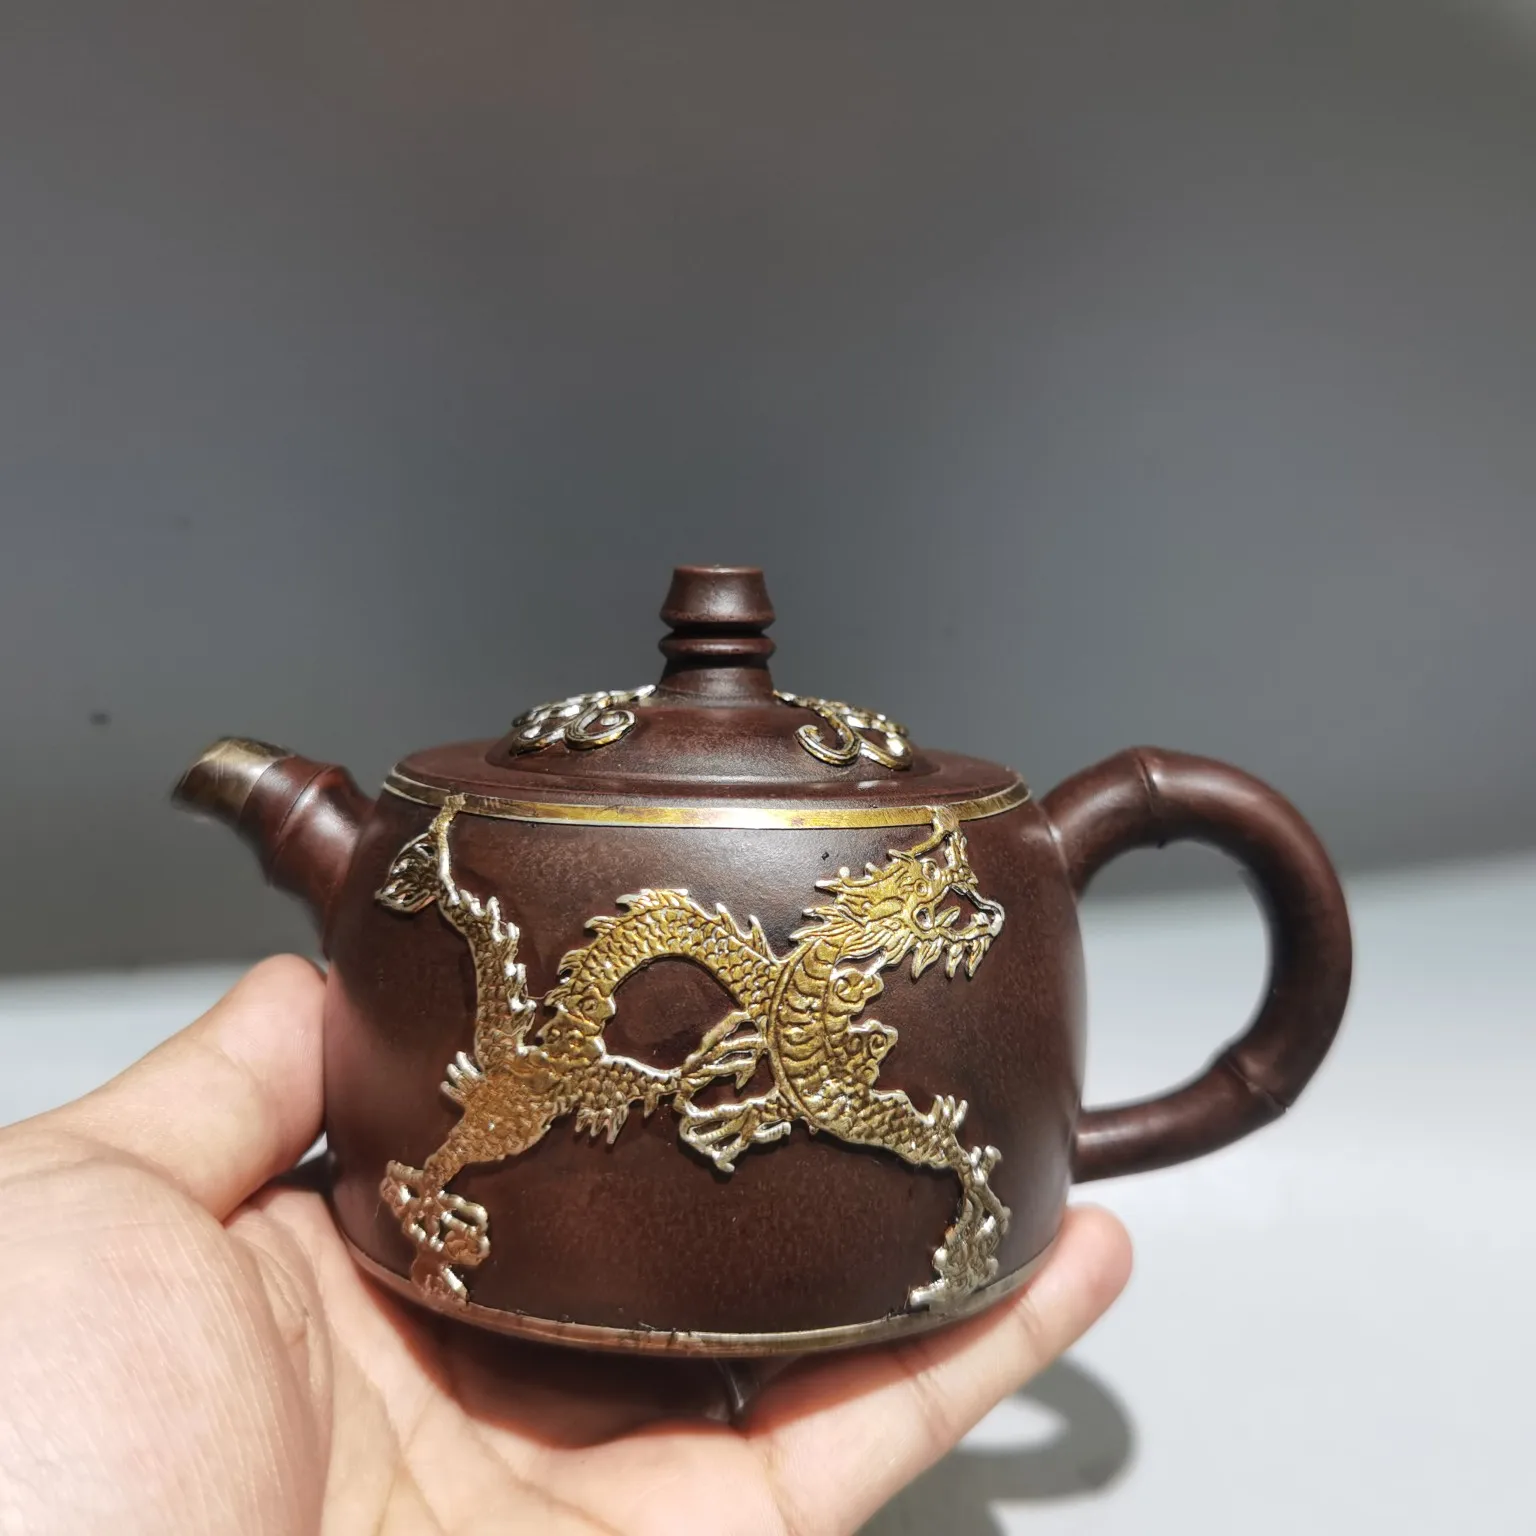 

Home Crafts Purple Clay Teapots With Exquisite Workmanship and Beautiful Appearance are Worth Decorating and Collecting